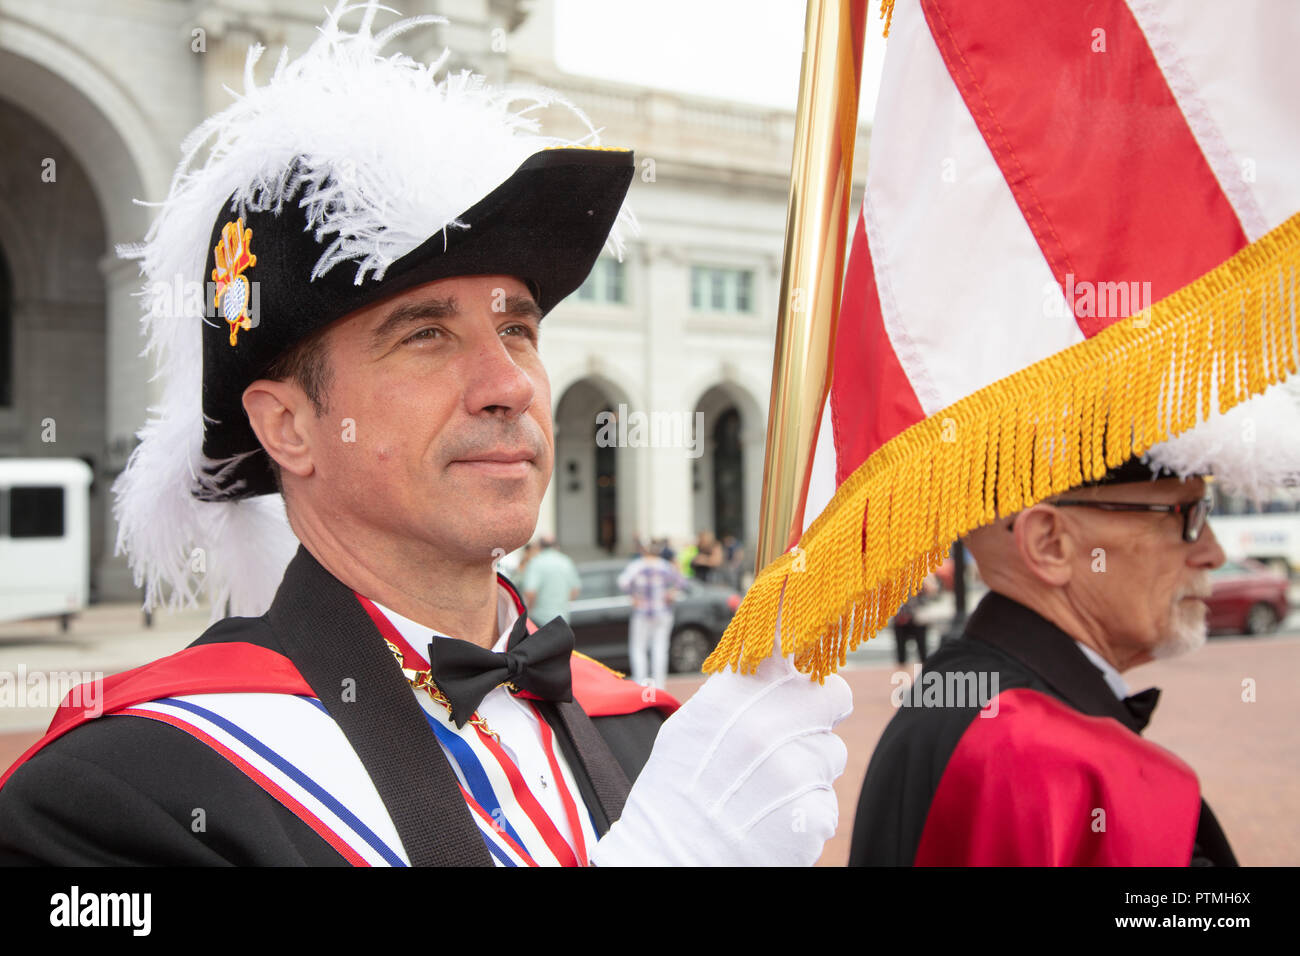 Washington, United States Of America. 08th Oct, 2018. Jeff Cuiper of  Alexandria Va. of the Color Corps of the Knights of Columbus participates  in the 2018 National Columbus Day Ceremony on Monday,